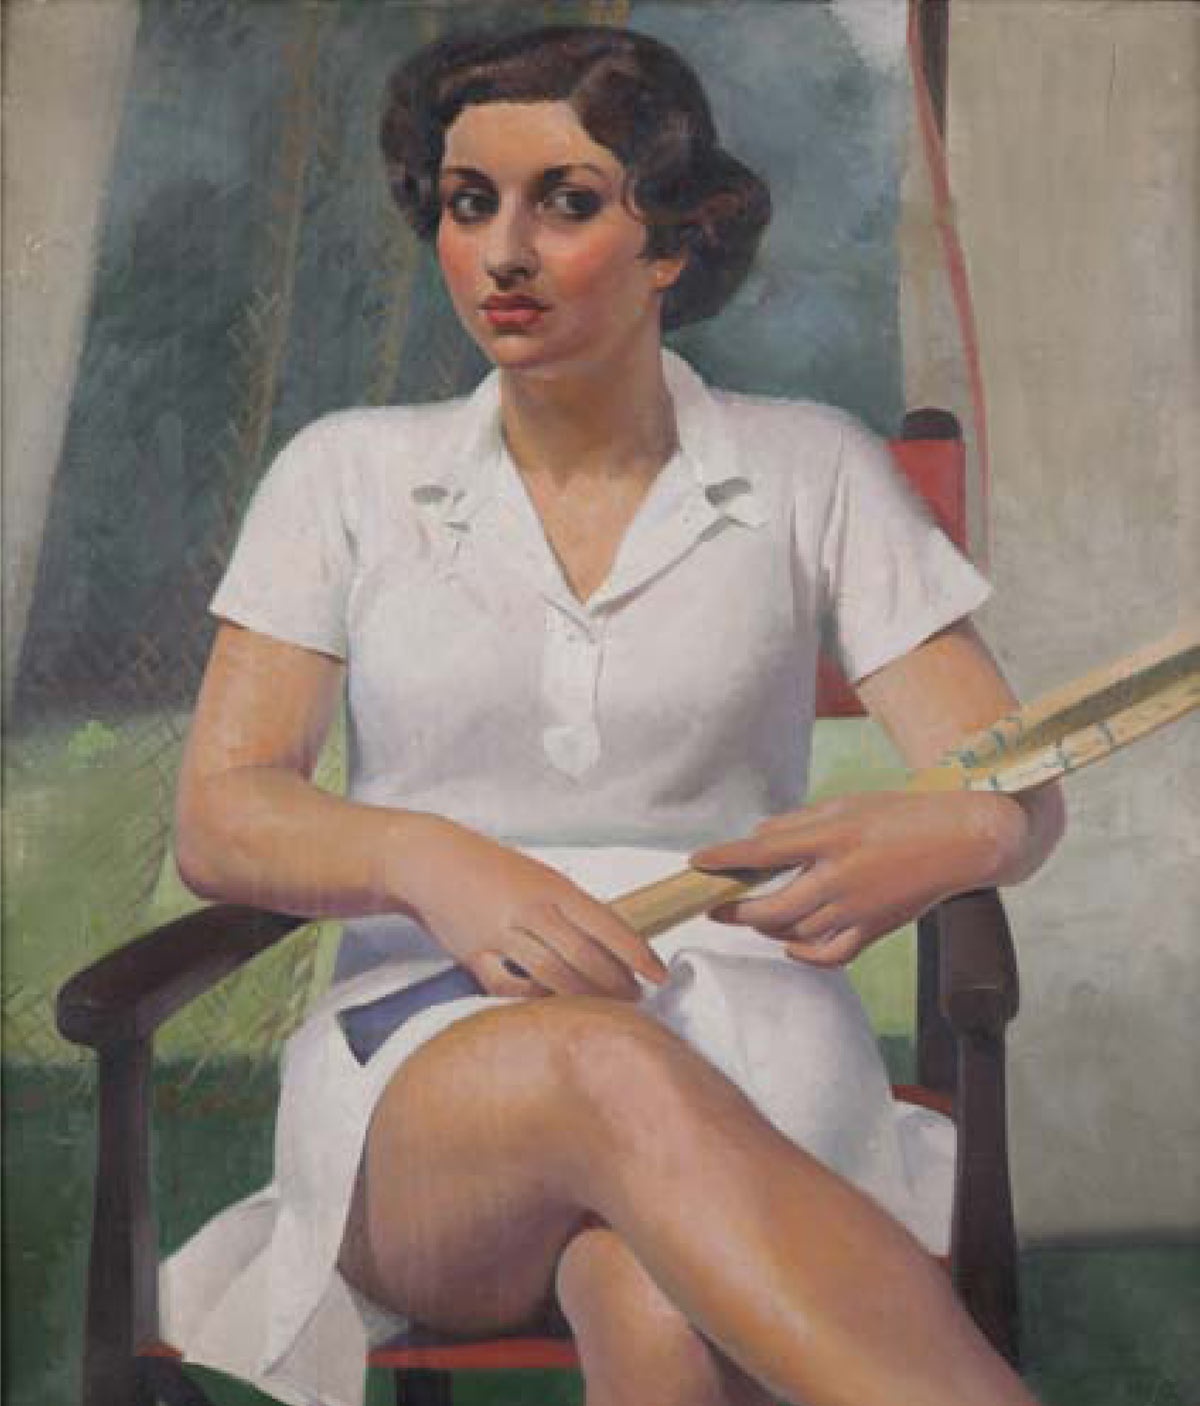 The Tennis Player by Percy Shakespeare (English, 1906 - 1943)